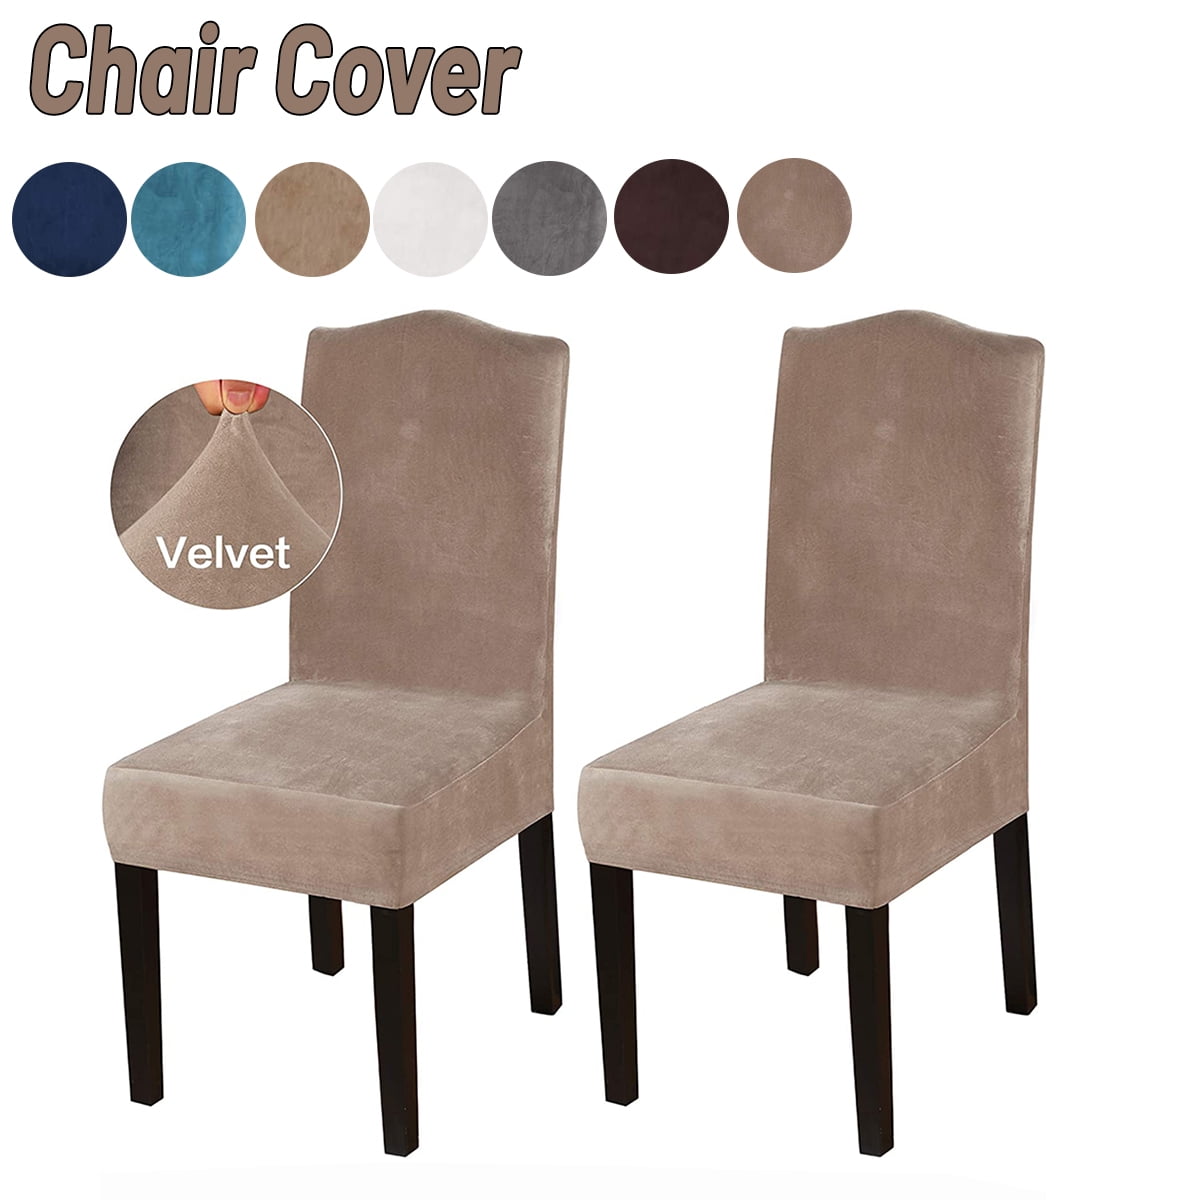 Luxury Velvet Spandex Chair Covers, Dining Room Chair Seat Protectors